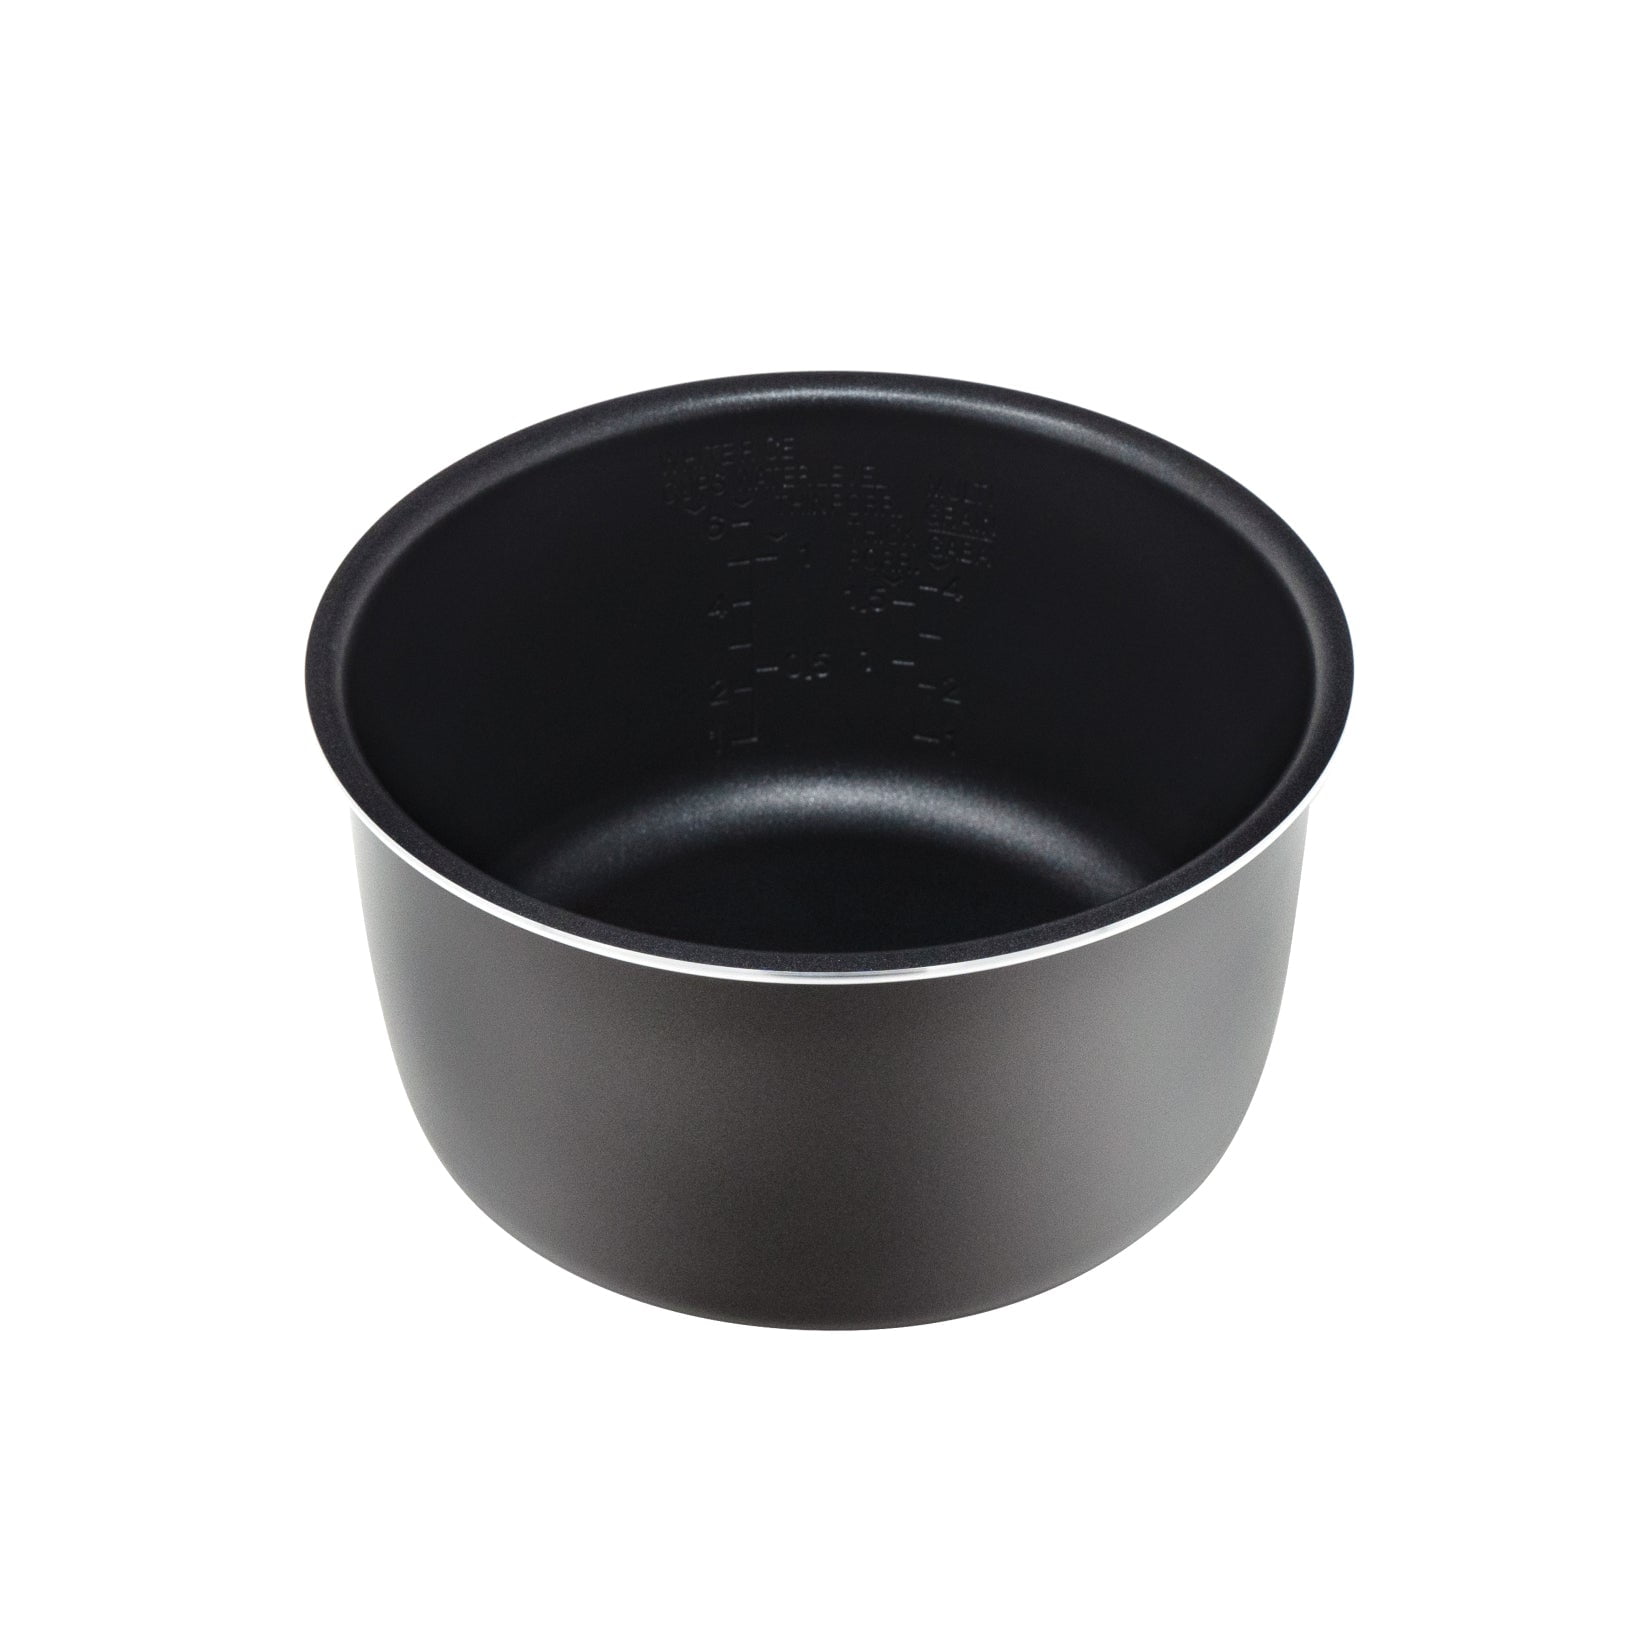 CUCKOO Replacement Inner Pot for Rice Cooker Model CR-0351FR/G, Black, 3  Cups (Uncooked)